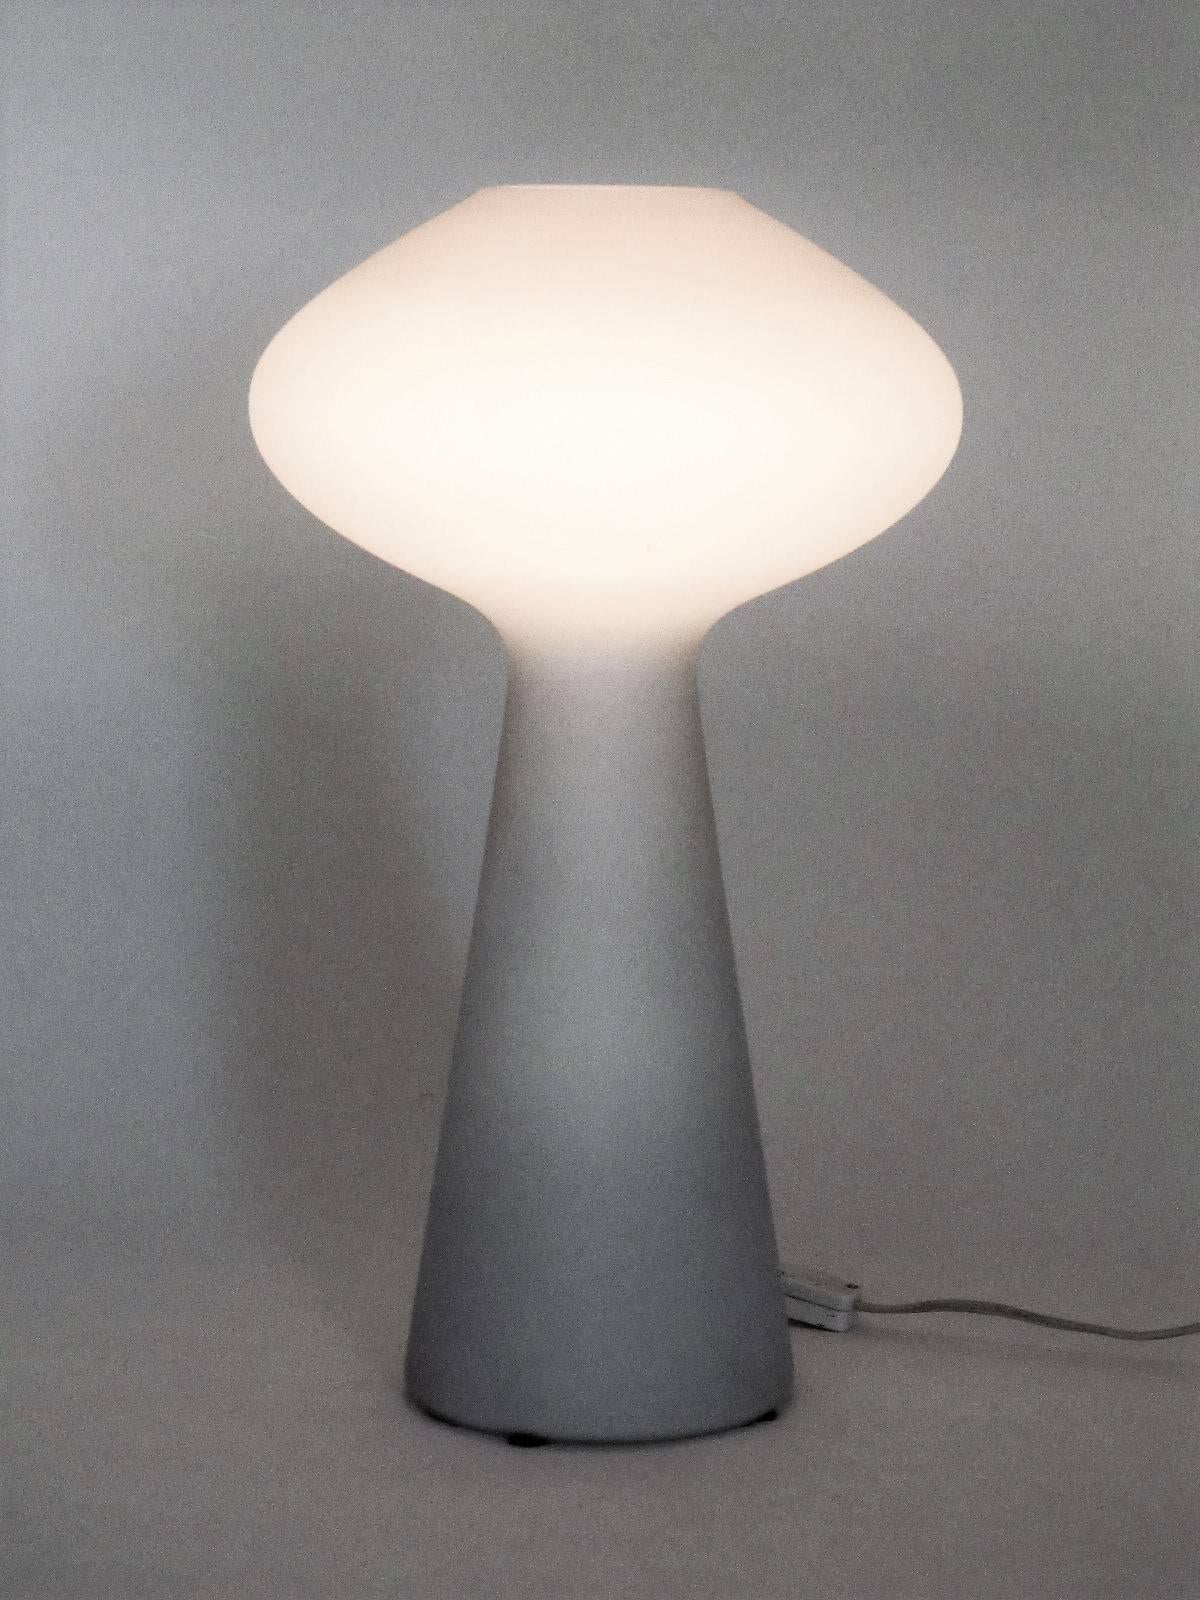 The thing about Finnish modern design is it's unwavering adherence to minimalism and strong simple lines. This lamp makes a prime example. Simple yet elegant curves, and its pure white color give these lamps an ethereal beauty.